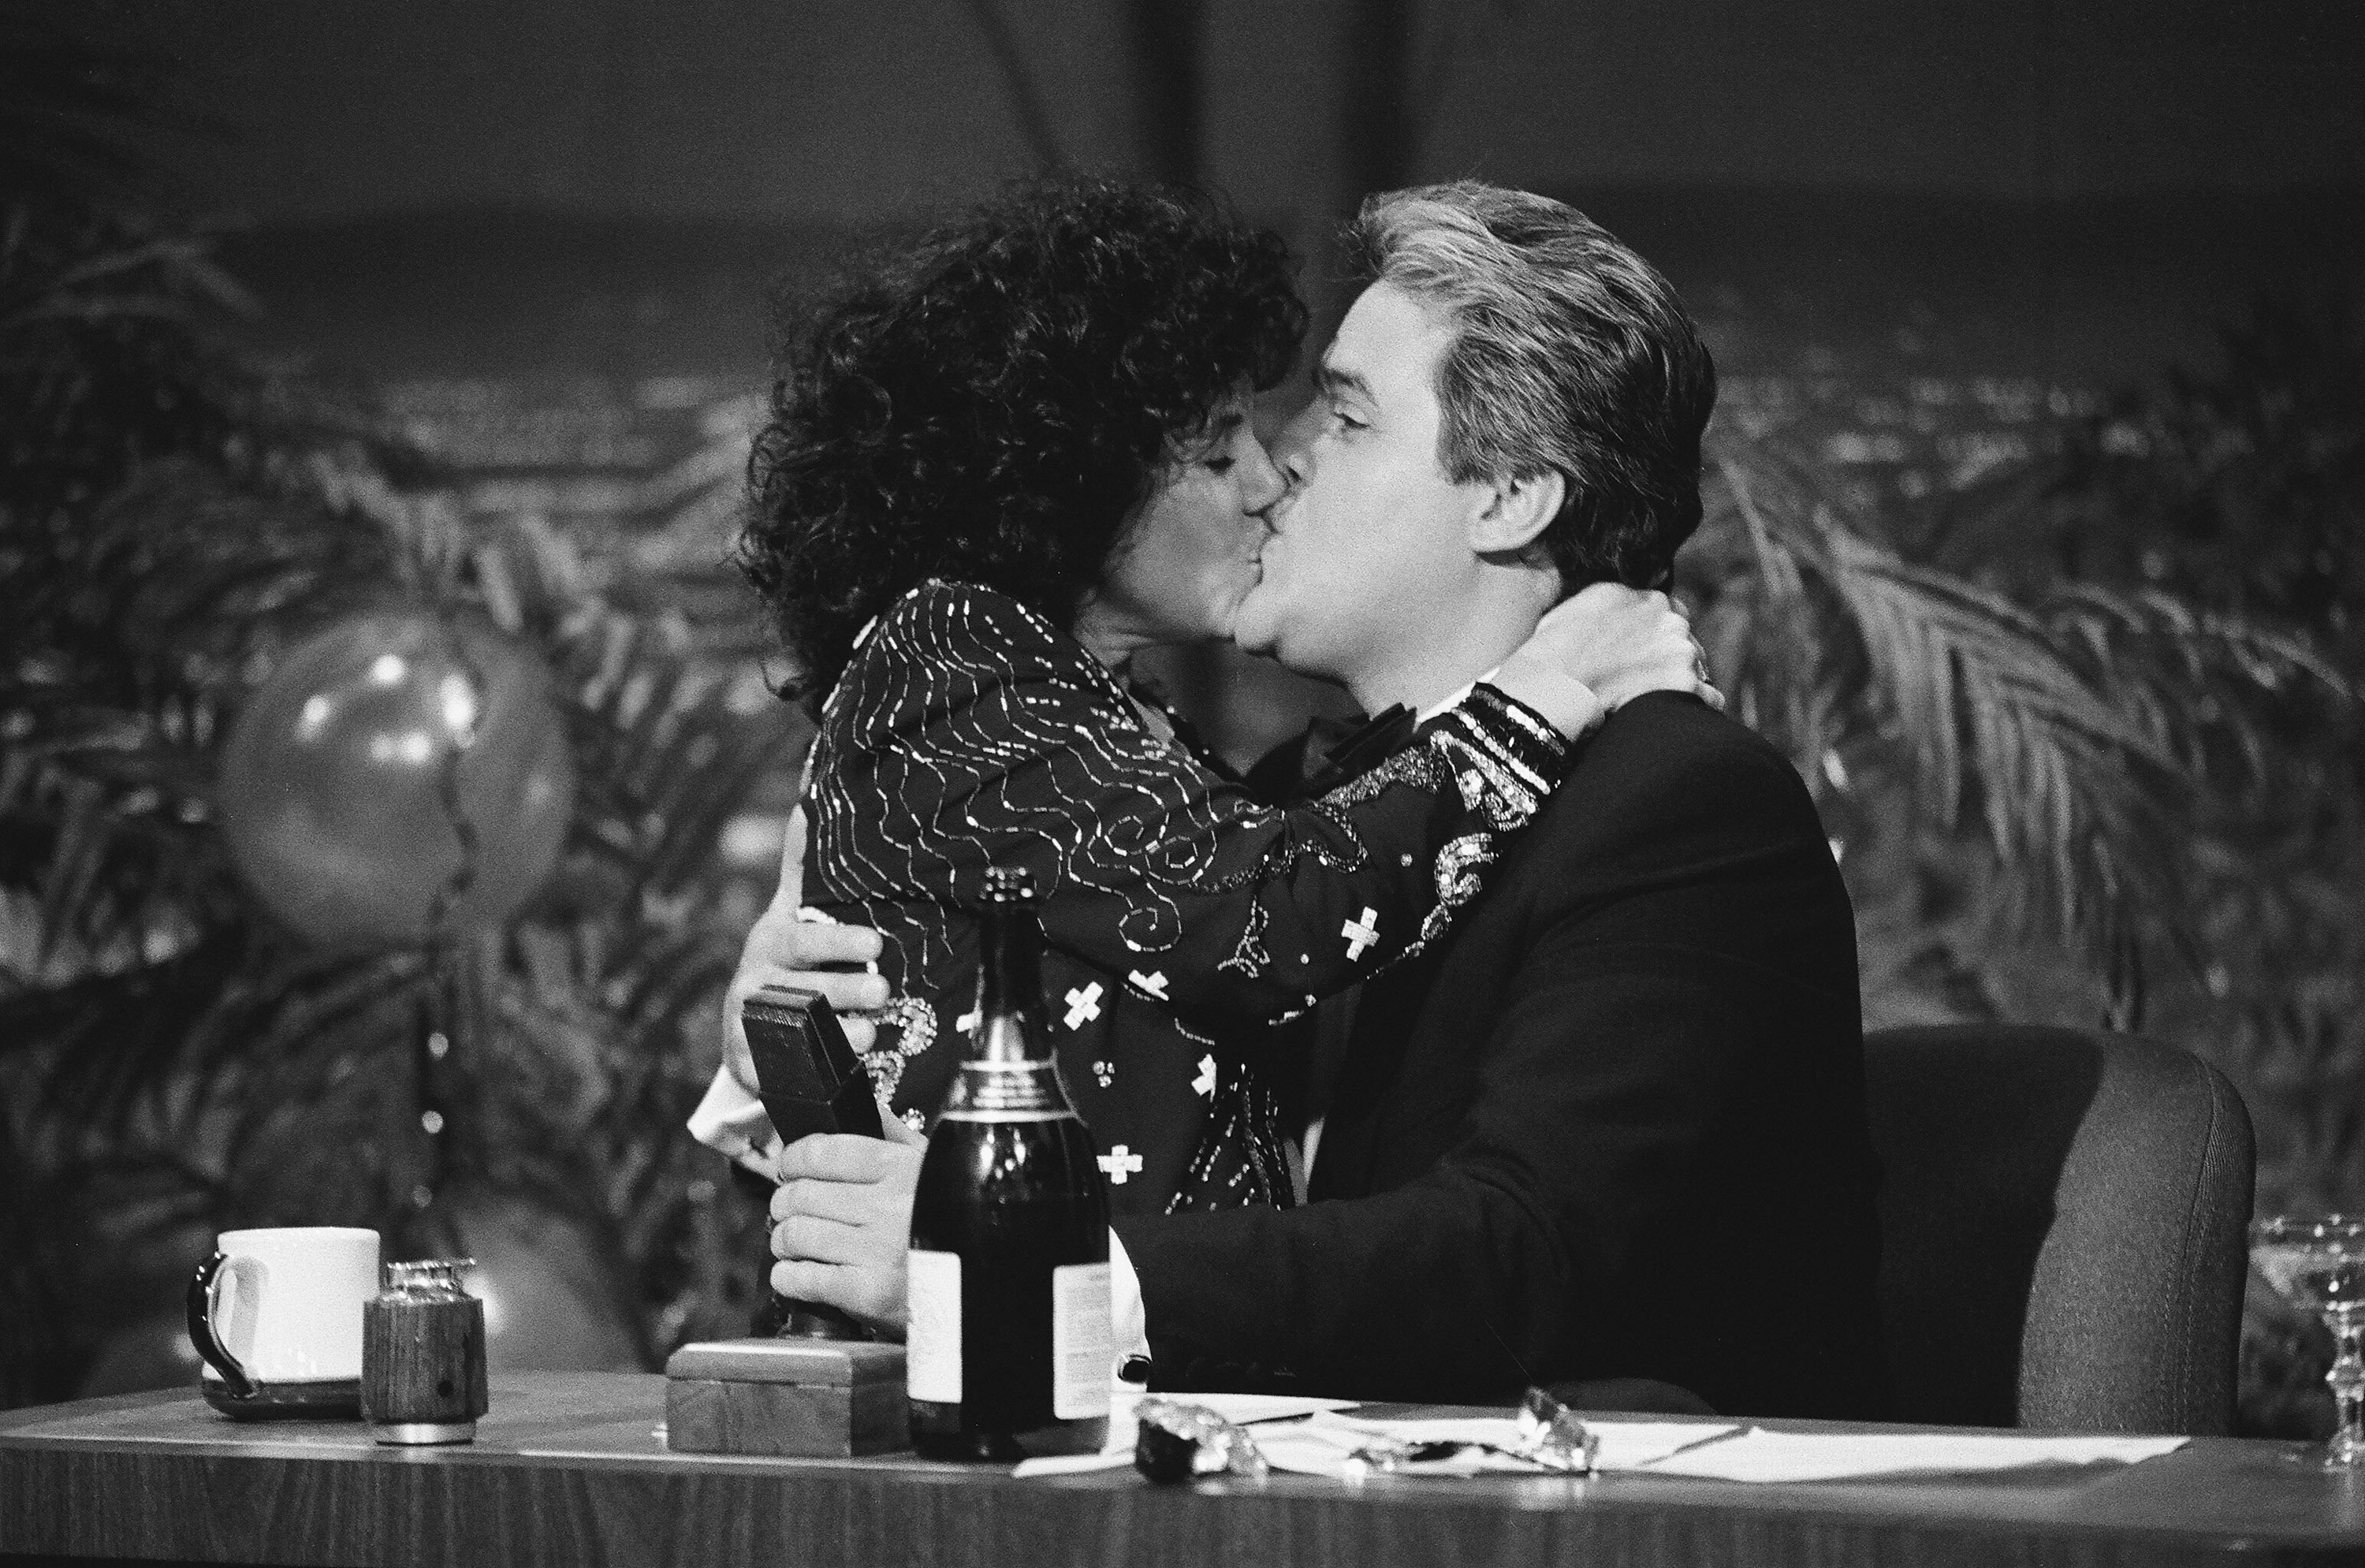 Mavis and Jay Leno on season 29 of "The Tonight Show Starring Johnny Carson" on December 31, 1990. | Source: Joseph Del Valle/NBCU Photo Bank/NBCUniversal/Getty Images